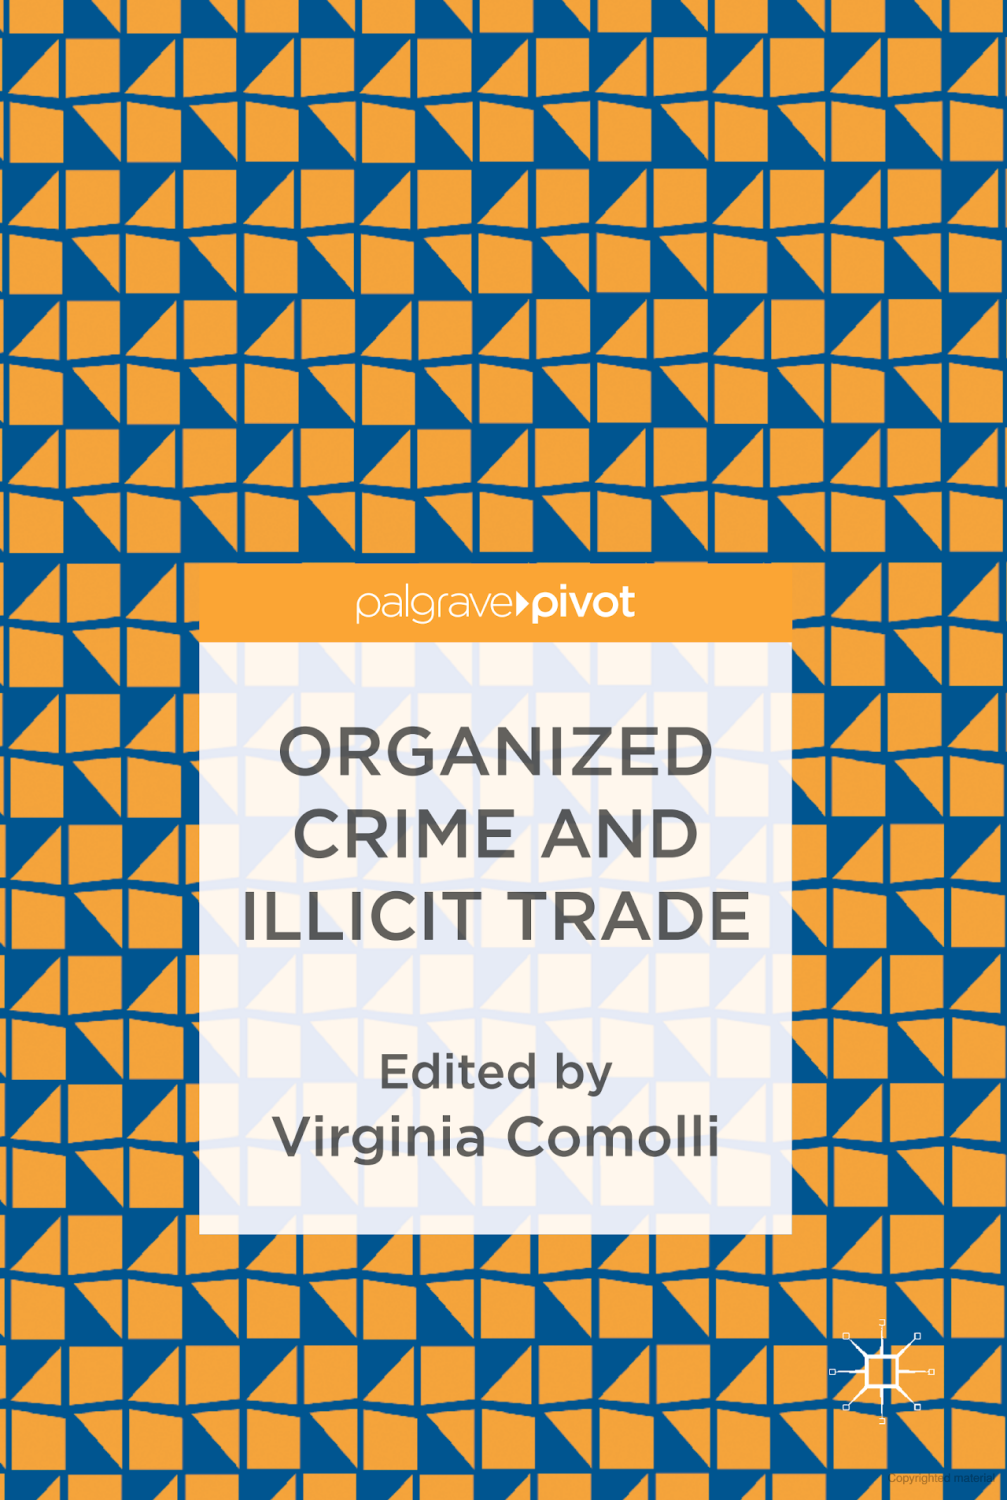 "Organized Crime and Illicit Trade: How to Respond to This Strategic Challenge in Old and New Domains" edited by Virginia Comolli